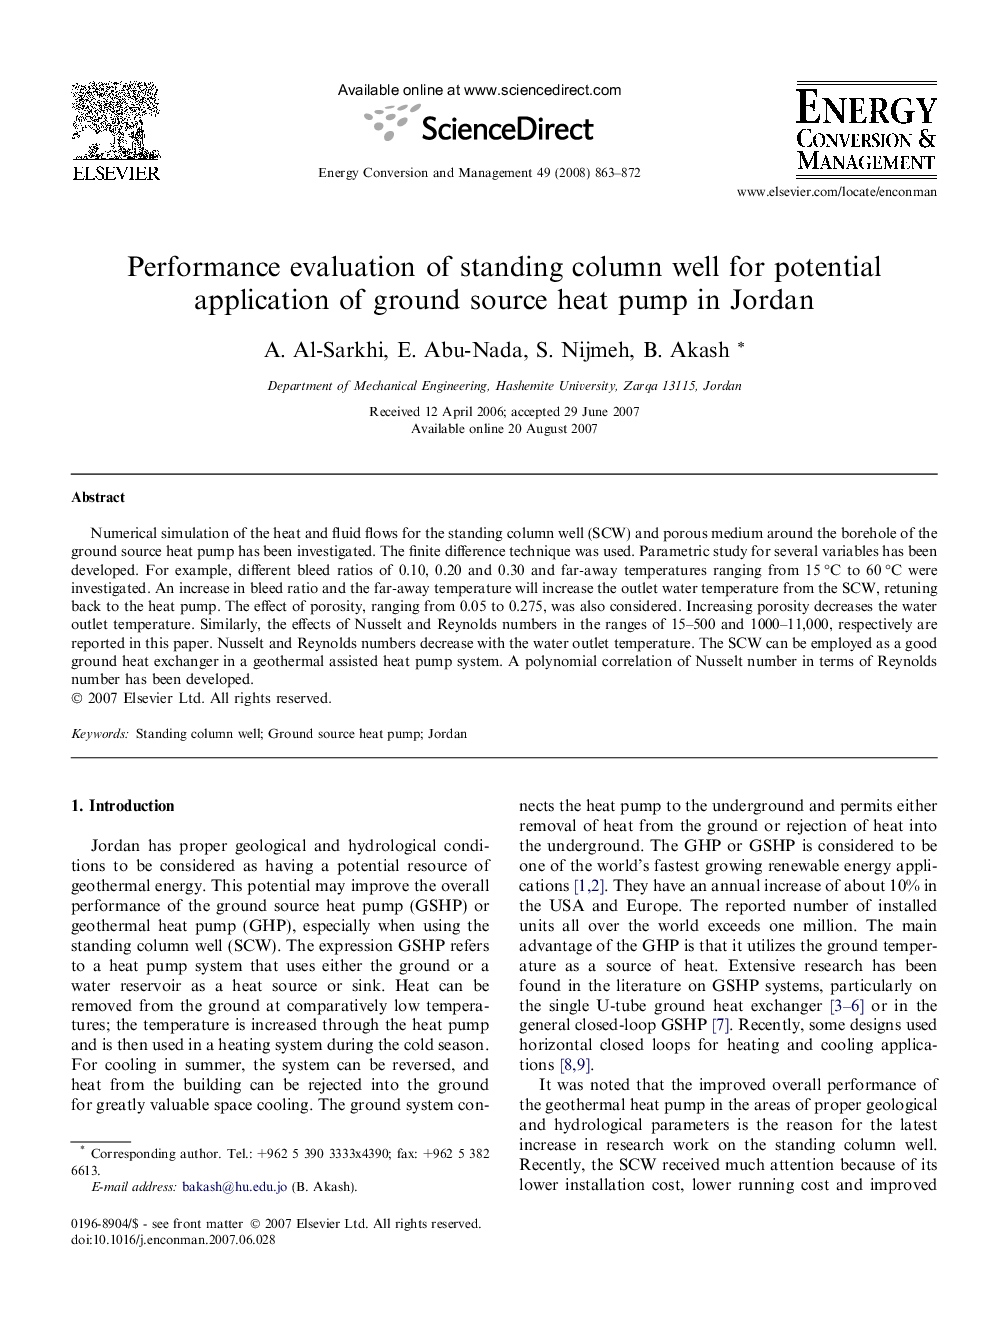 Performance evaluation of standing column well for potential application of ground source heat pump in Jordan